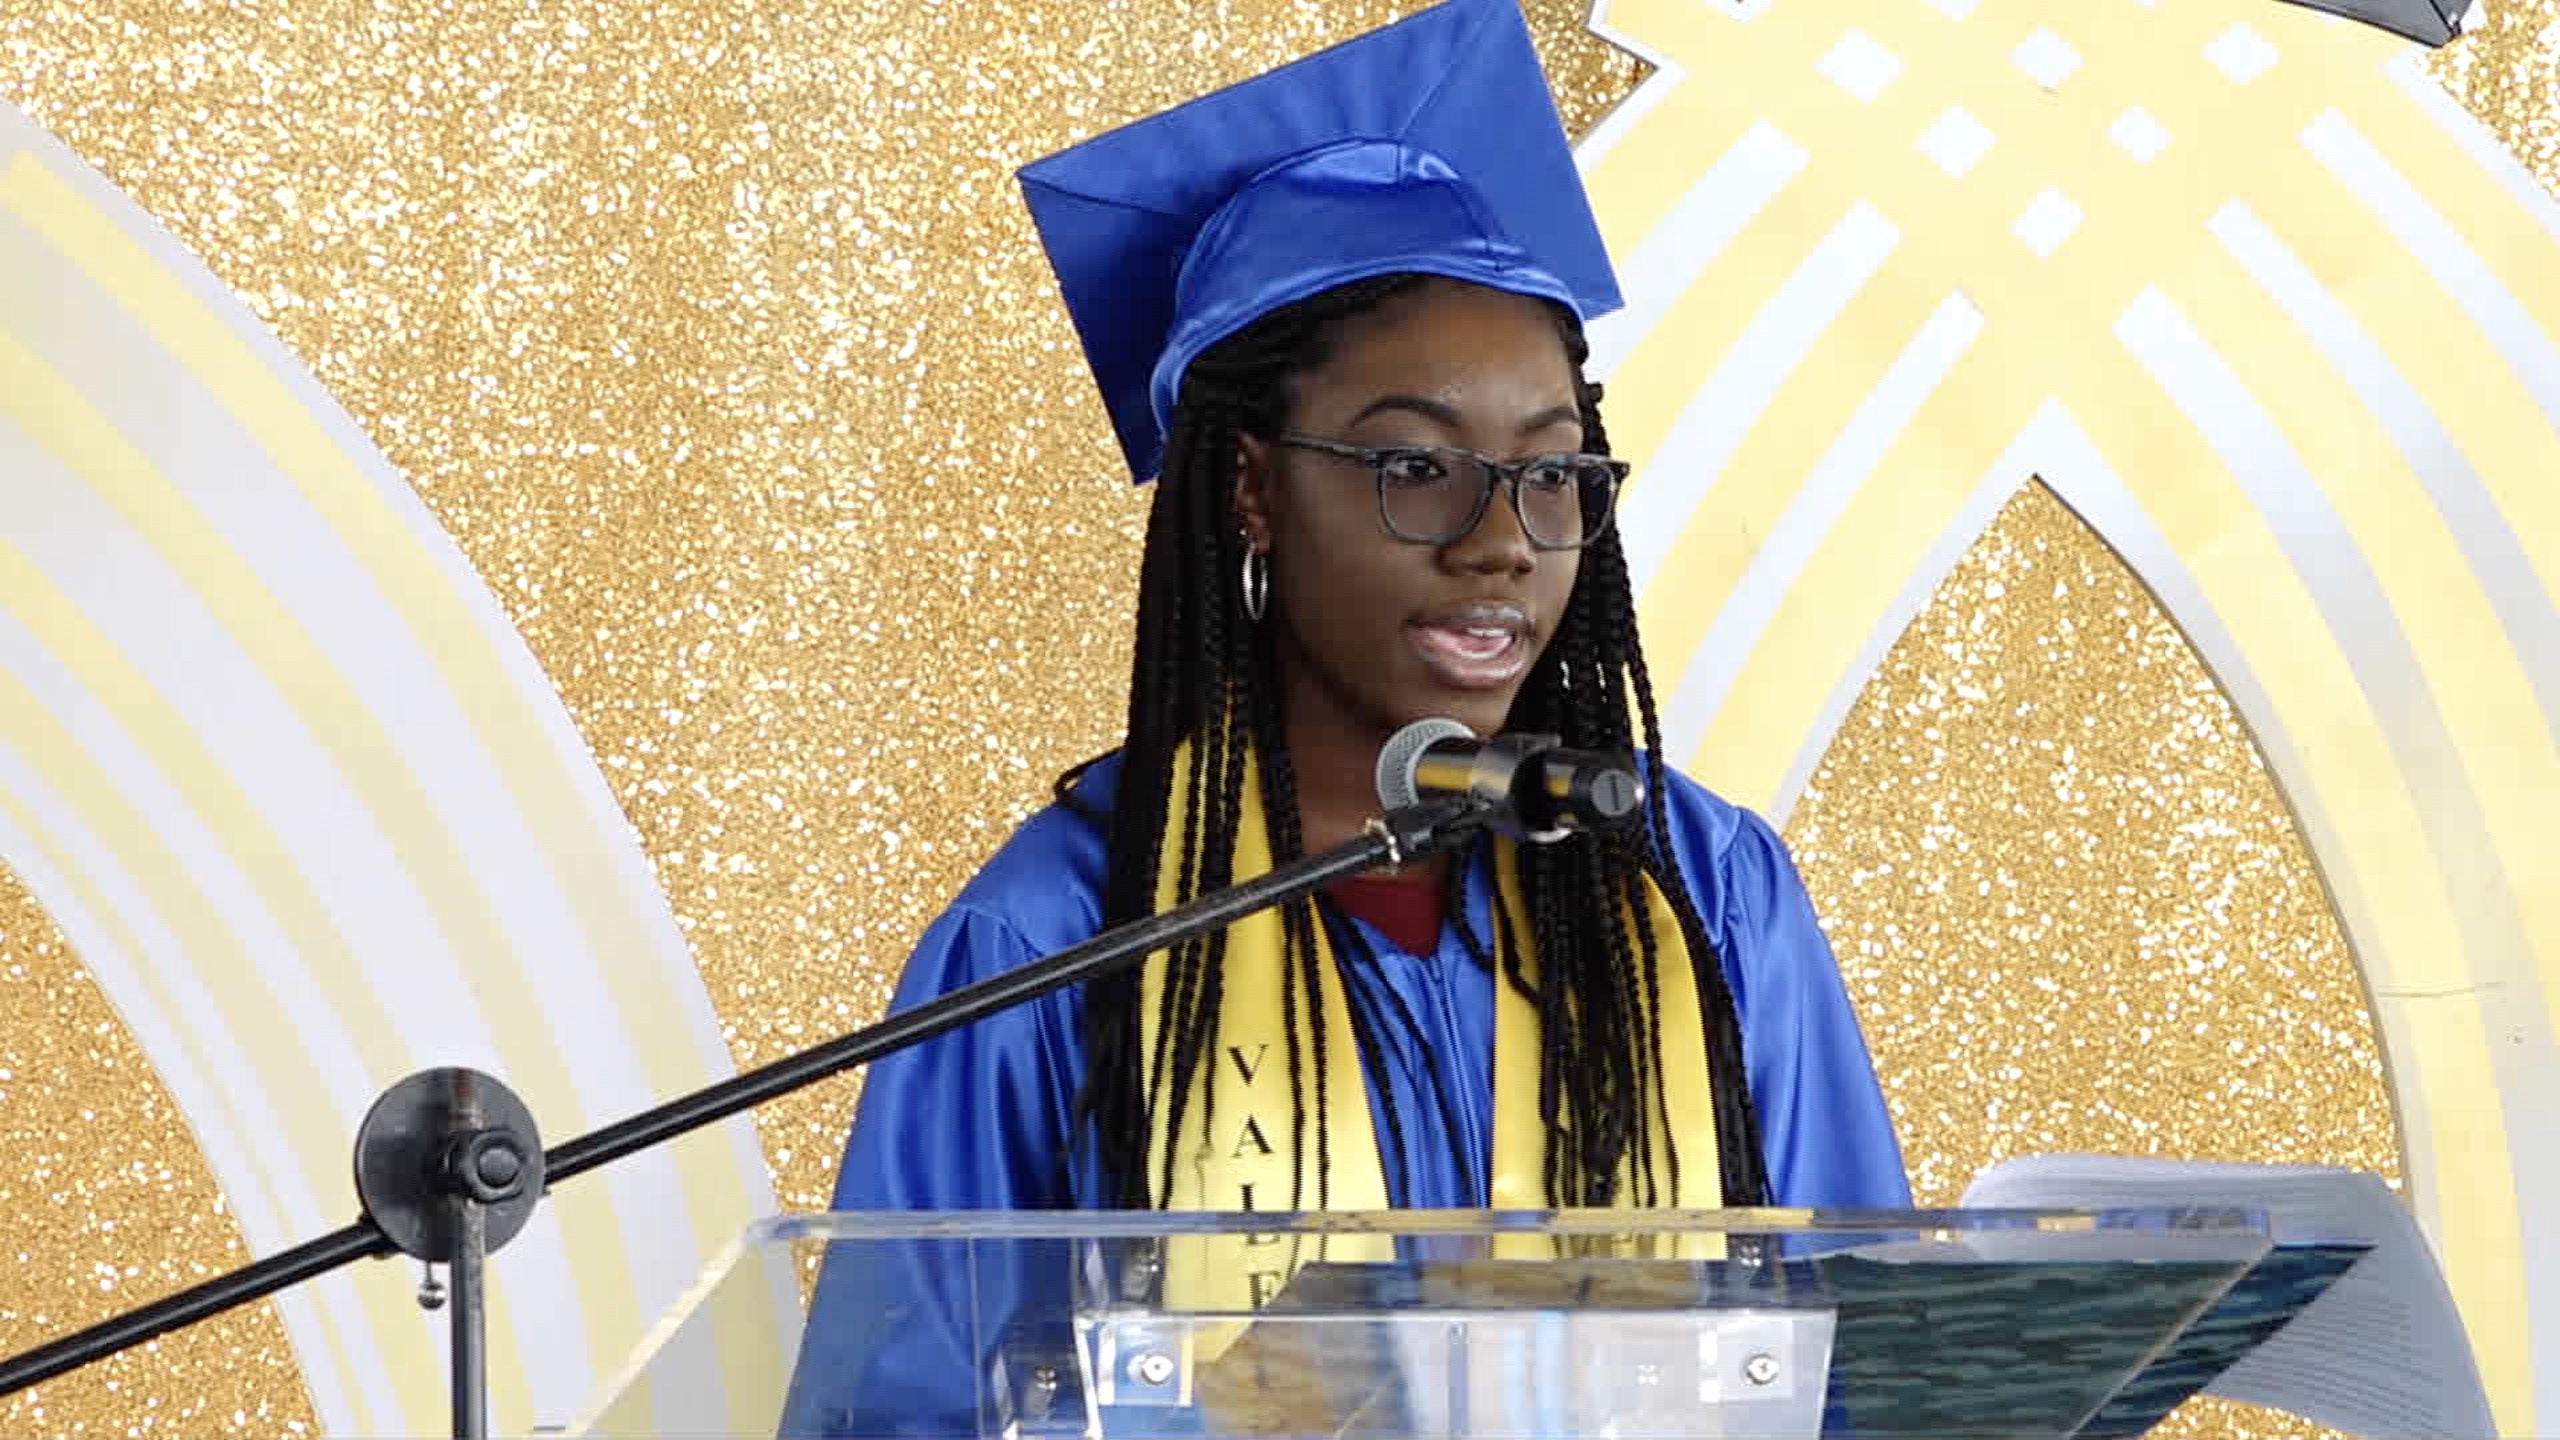 Ms. Jahkéla Barrett, Valedictorian of the Charlestown Secondary School Graduating Class of 2021 delivering the valedictory speech at the graduating ceremony at the Nevis Cultural Village on March 02, 2022